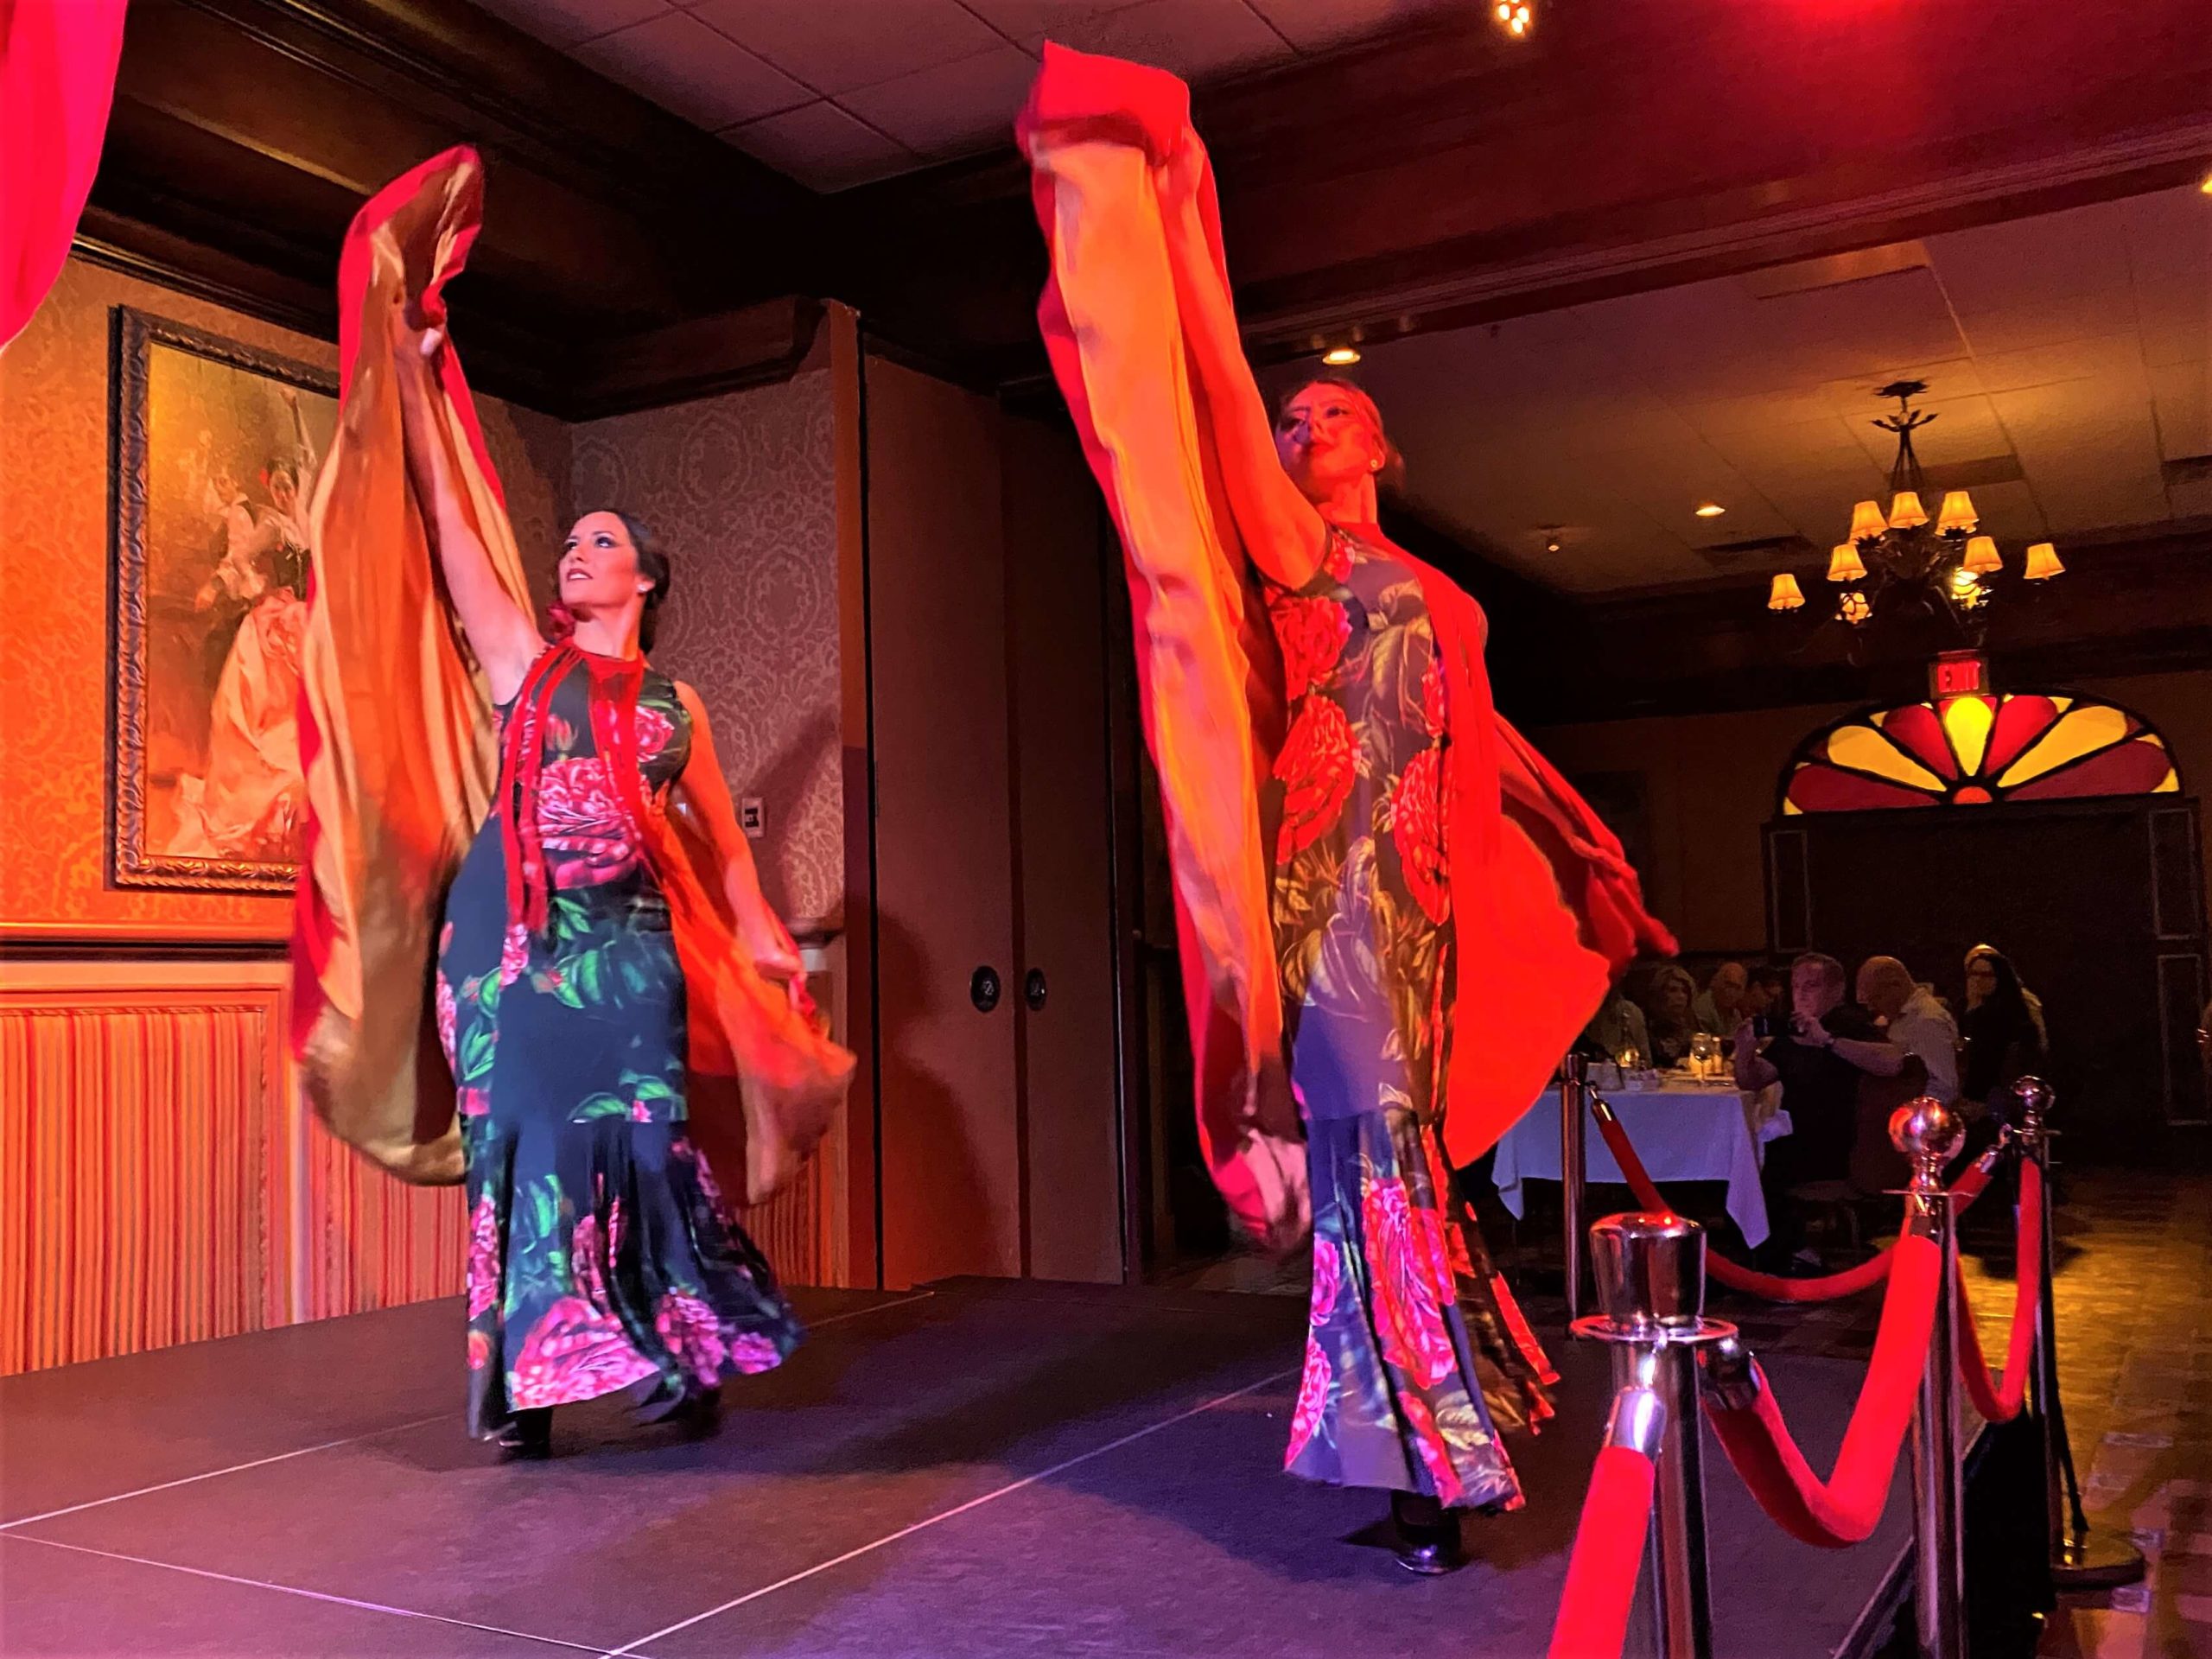 Two costumed dancers are on stage at Flamenco Dance Show at Columbia Restaurant Ybor City wearing long dark dresses and have their arms raised as they perform with red velvet capes